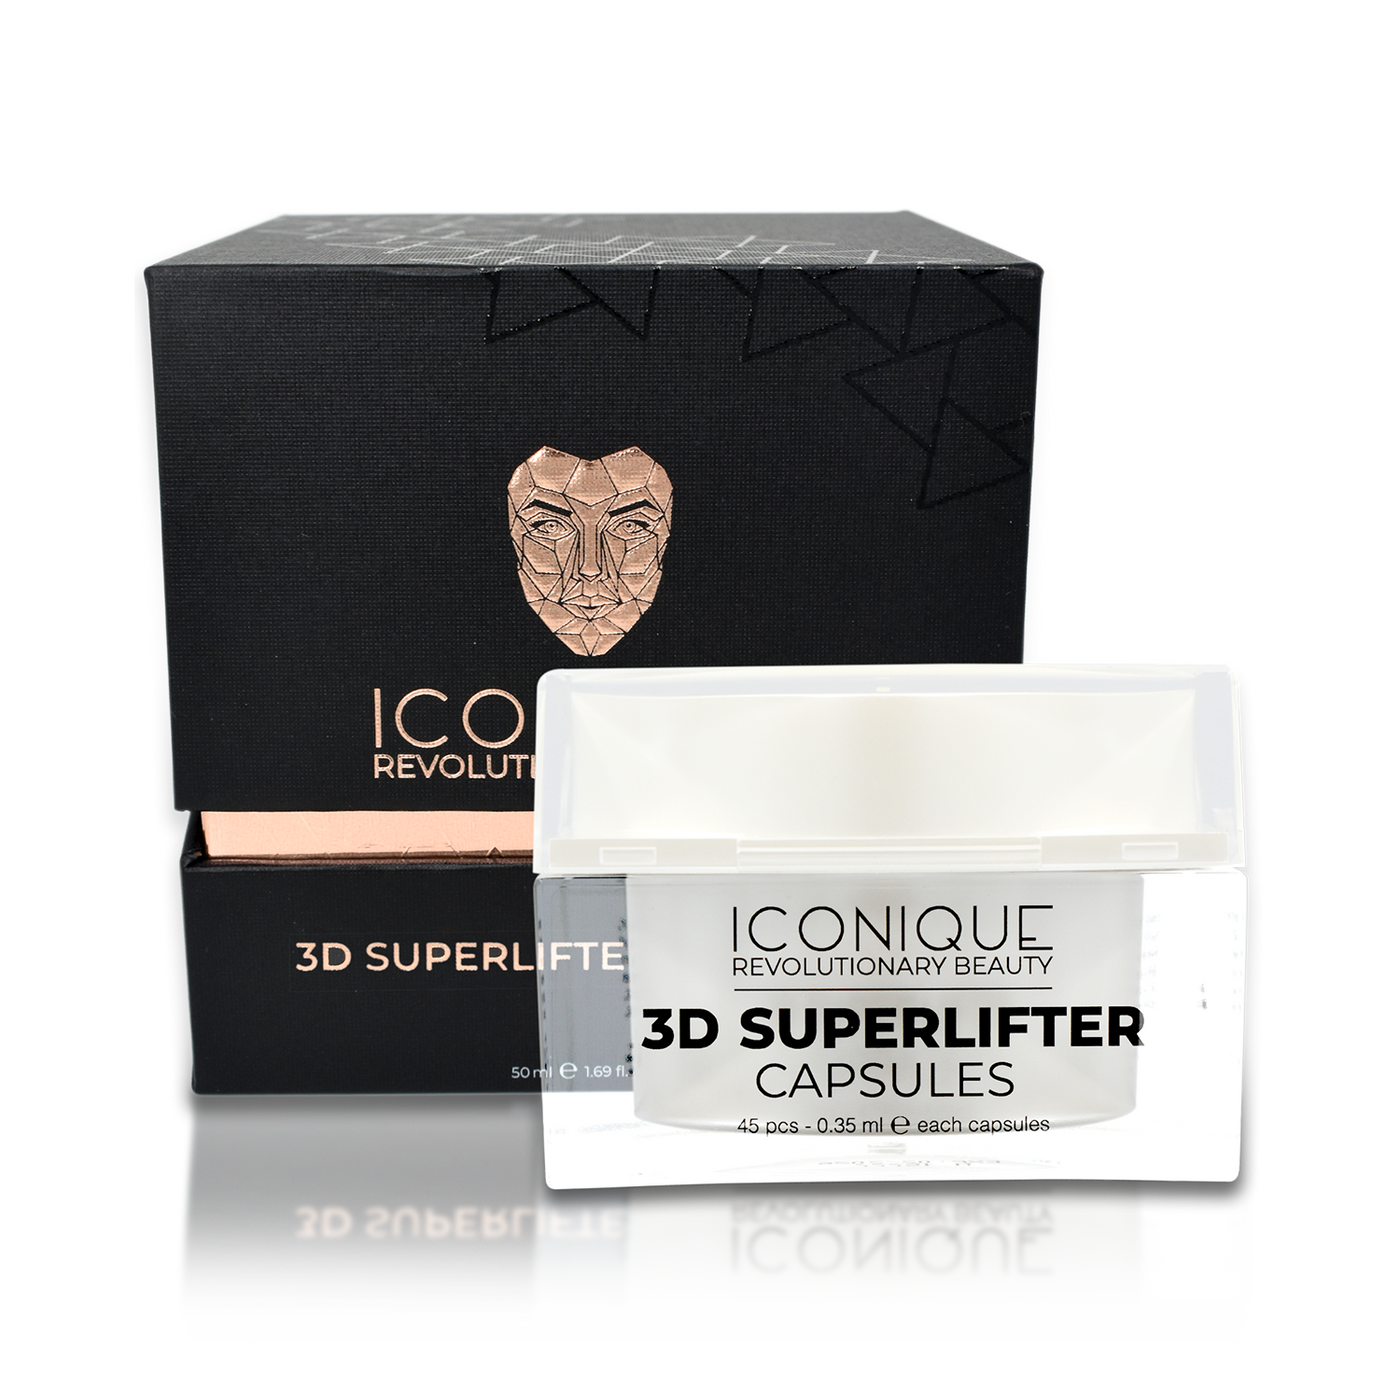 3D Superlifter Capsules